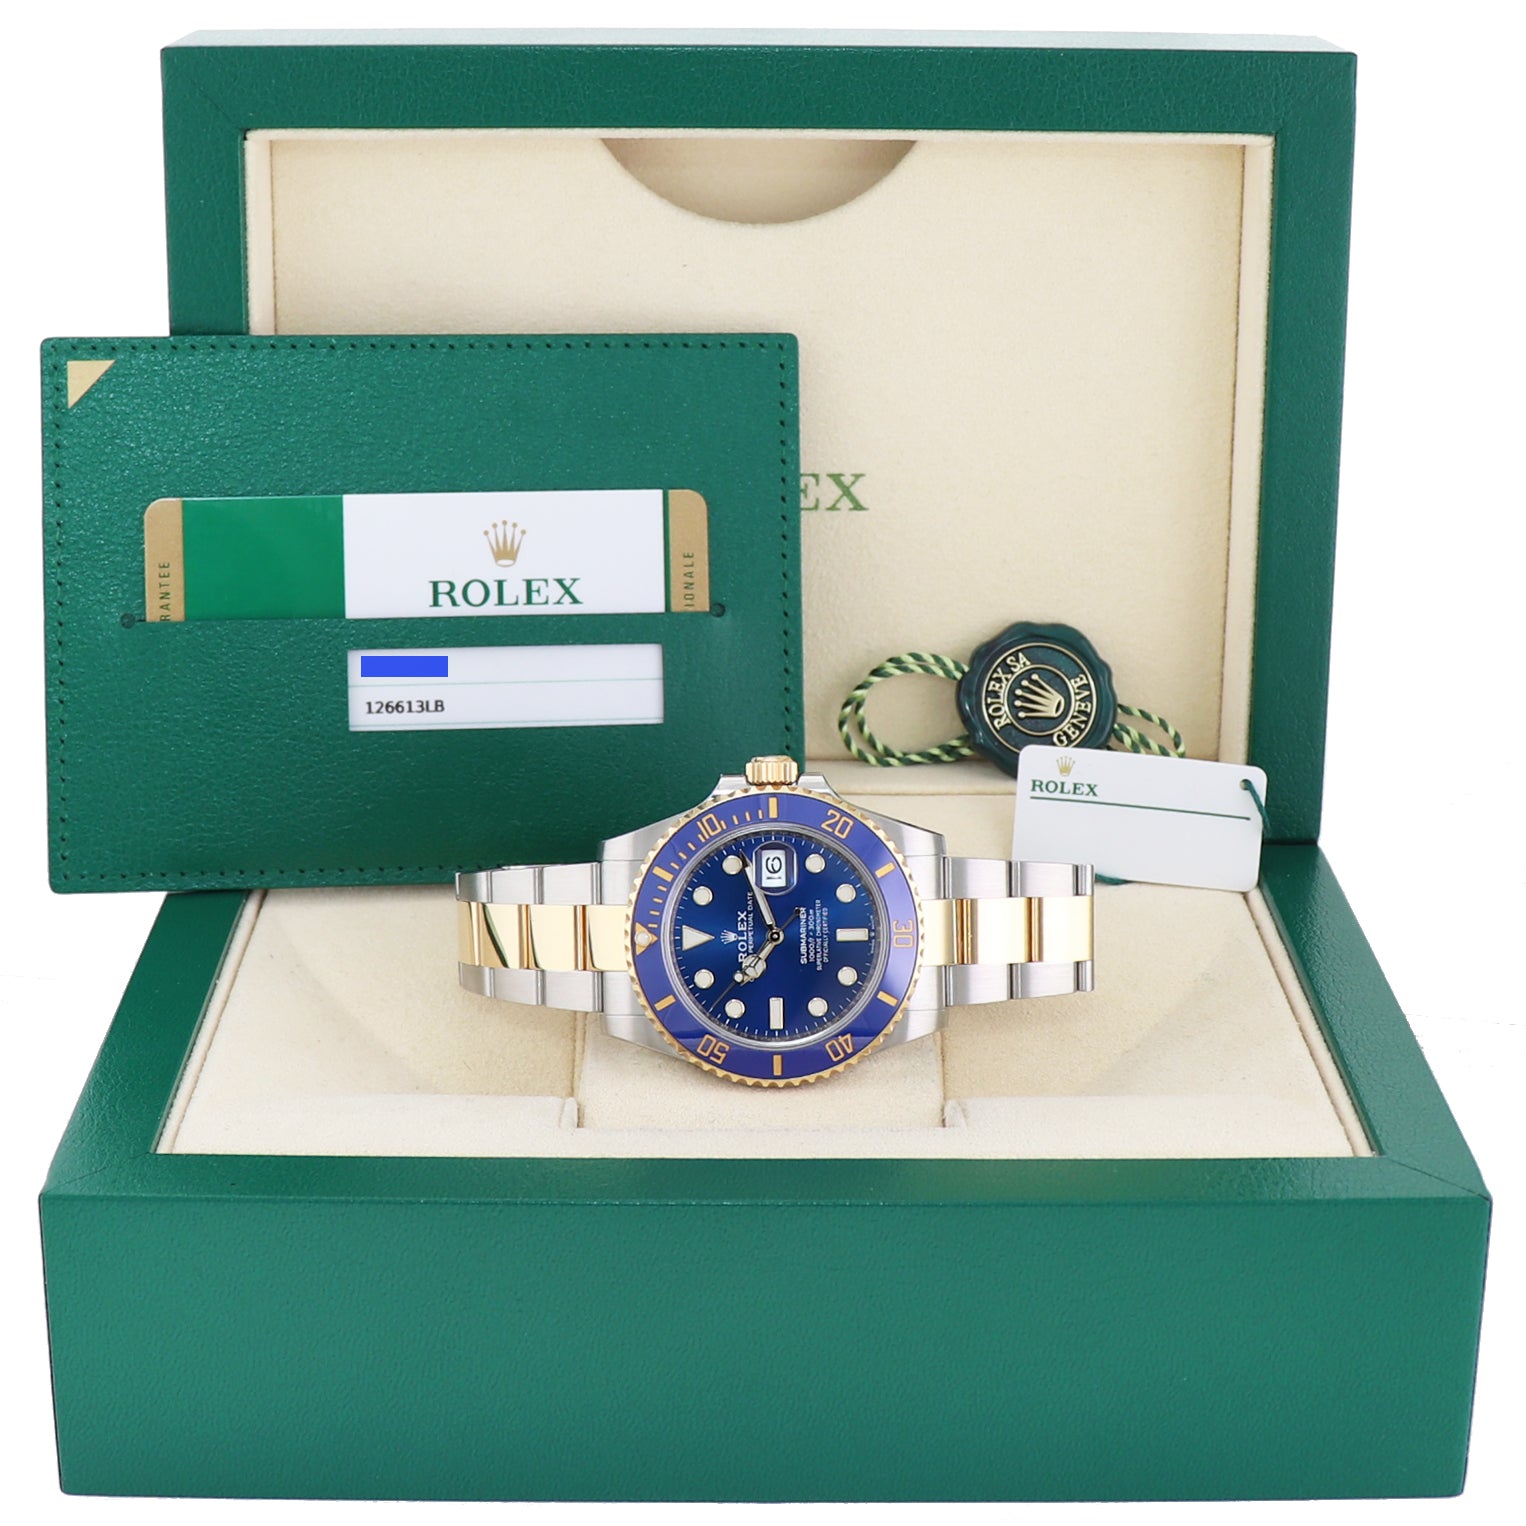 PAPERS Rolex Submariner 41mm Blue 126613LB Two Tone Gold Steel Watch